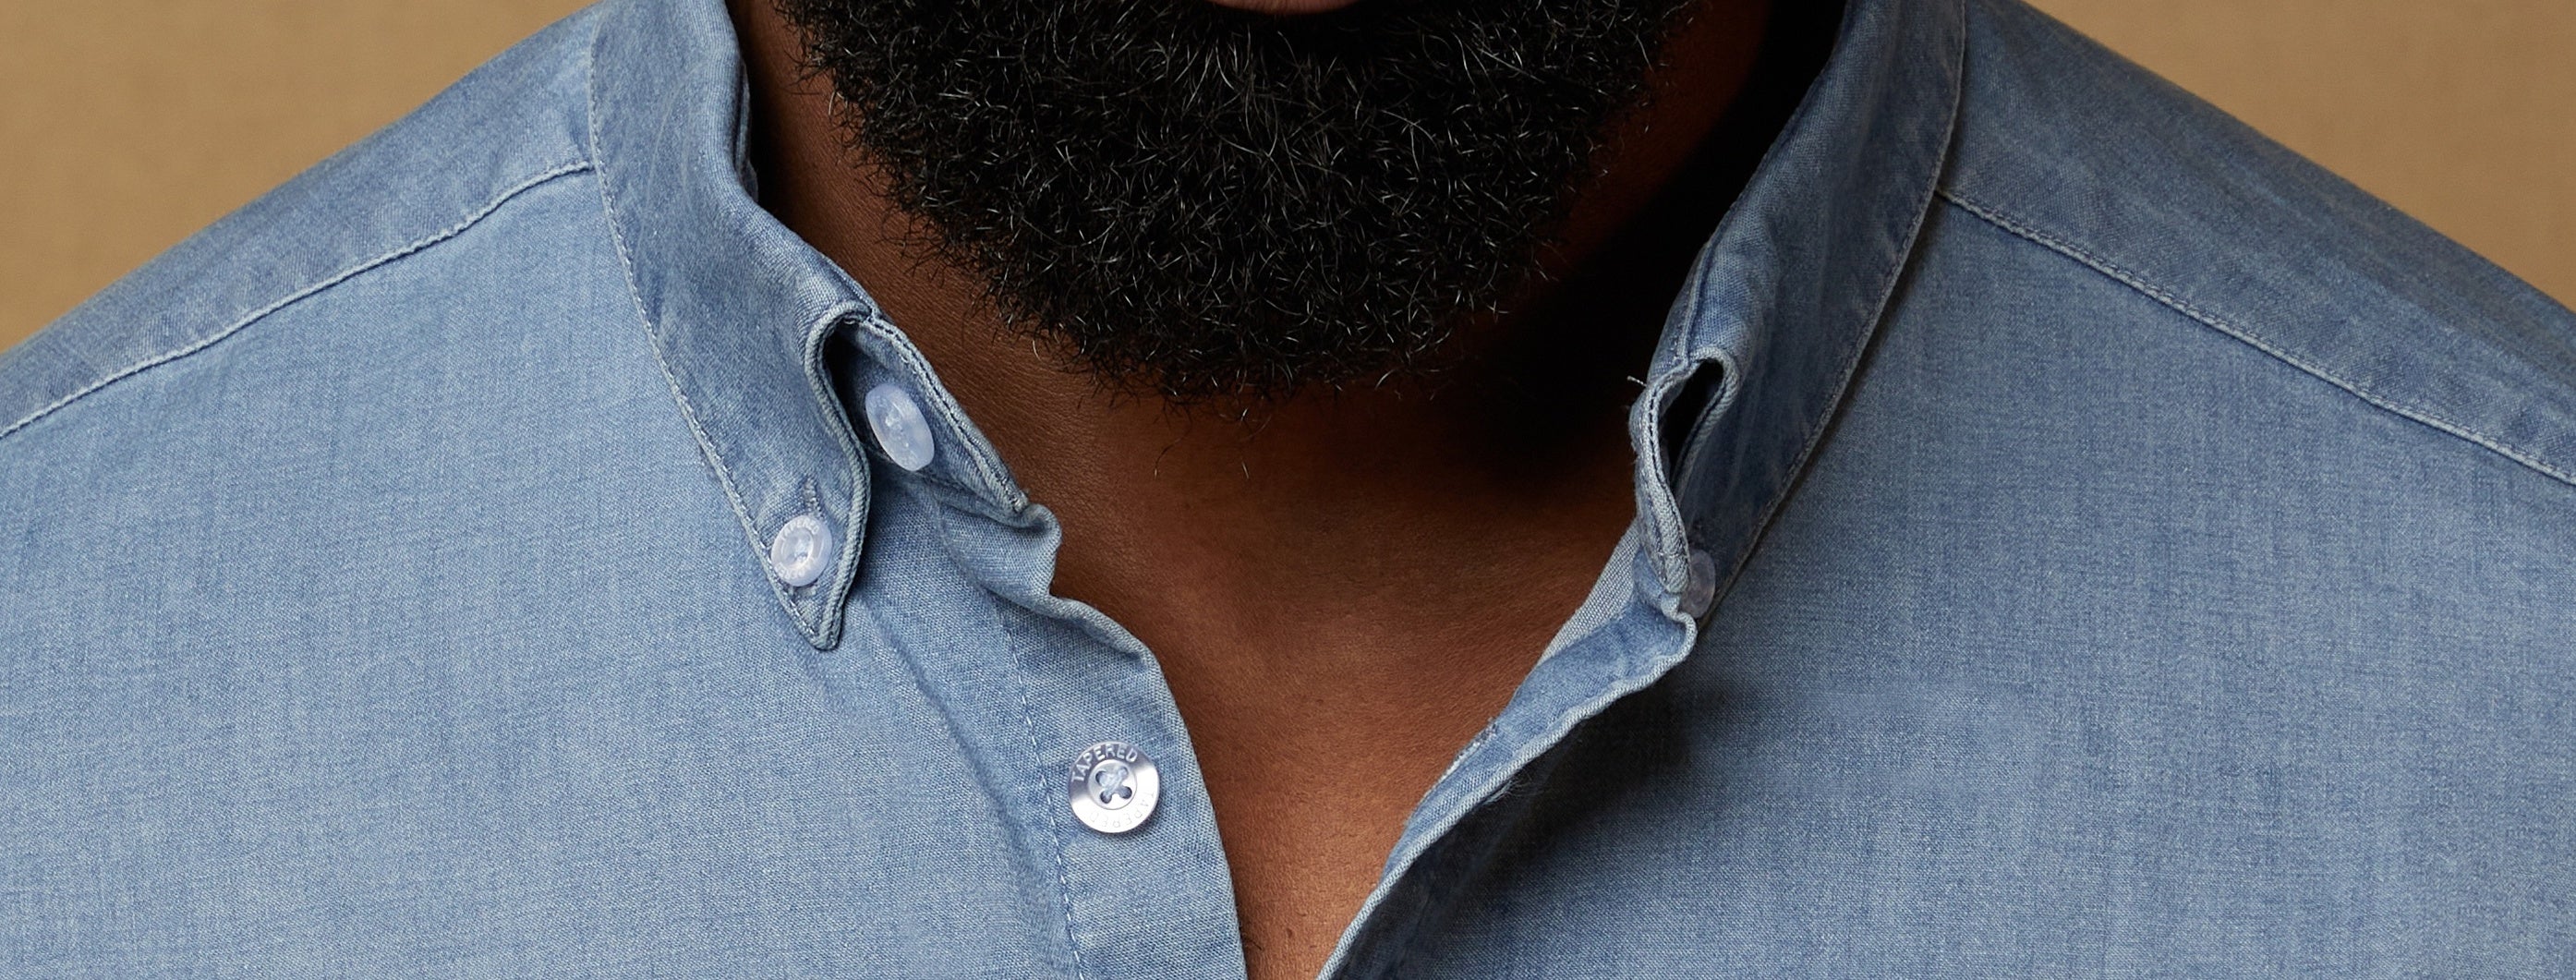 Button Up vs. Button Down: What's the Difference and When to Wear